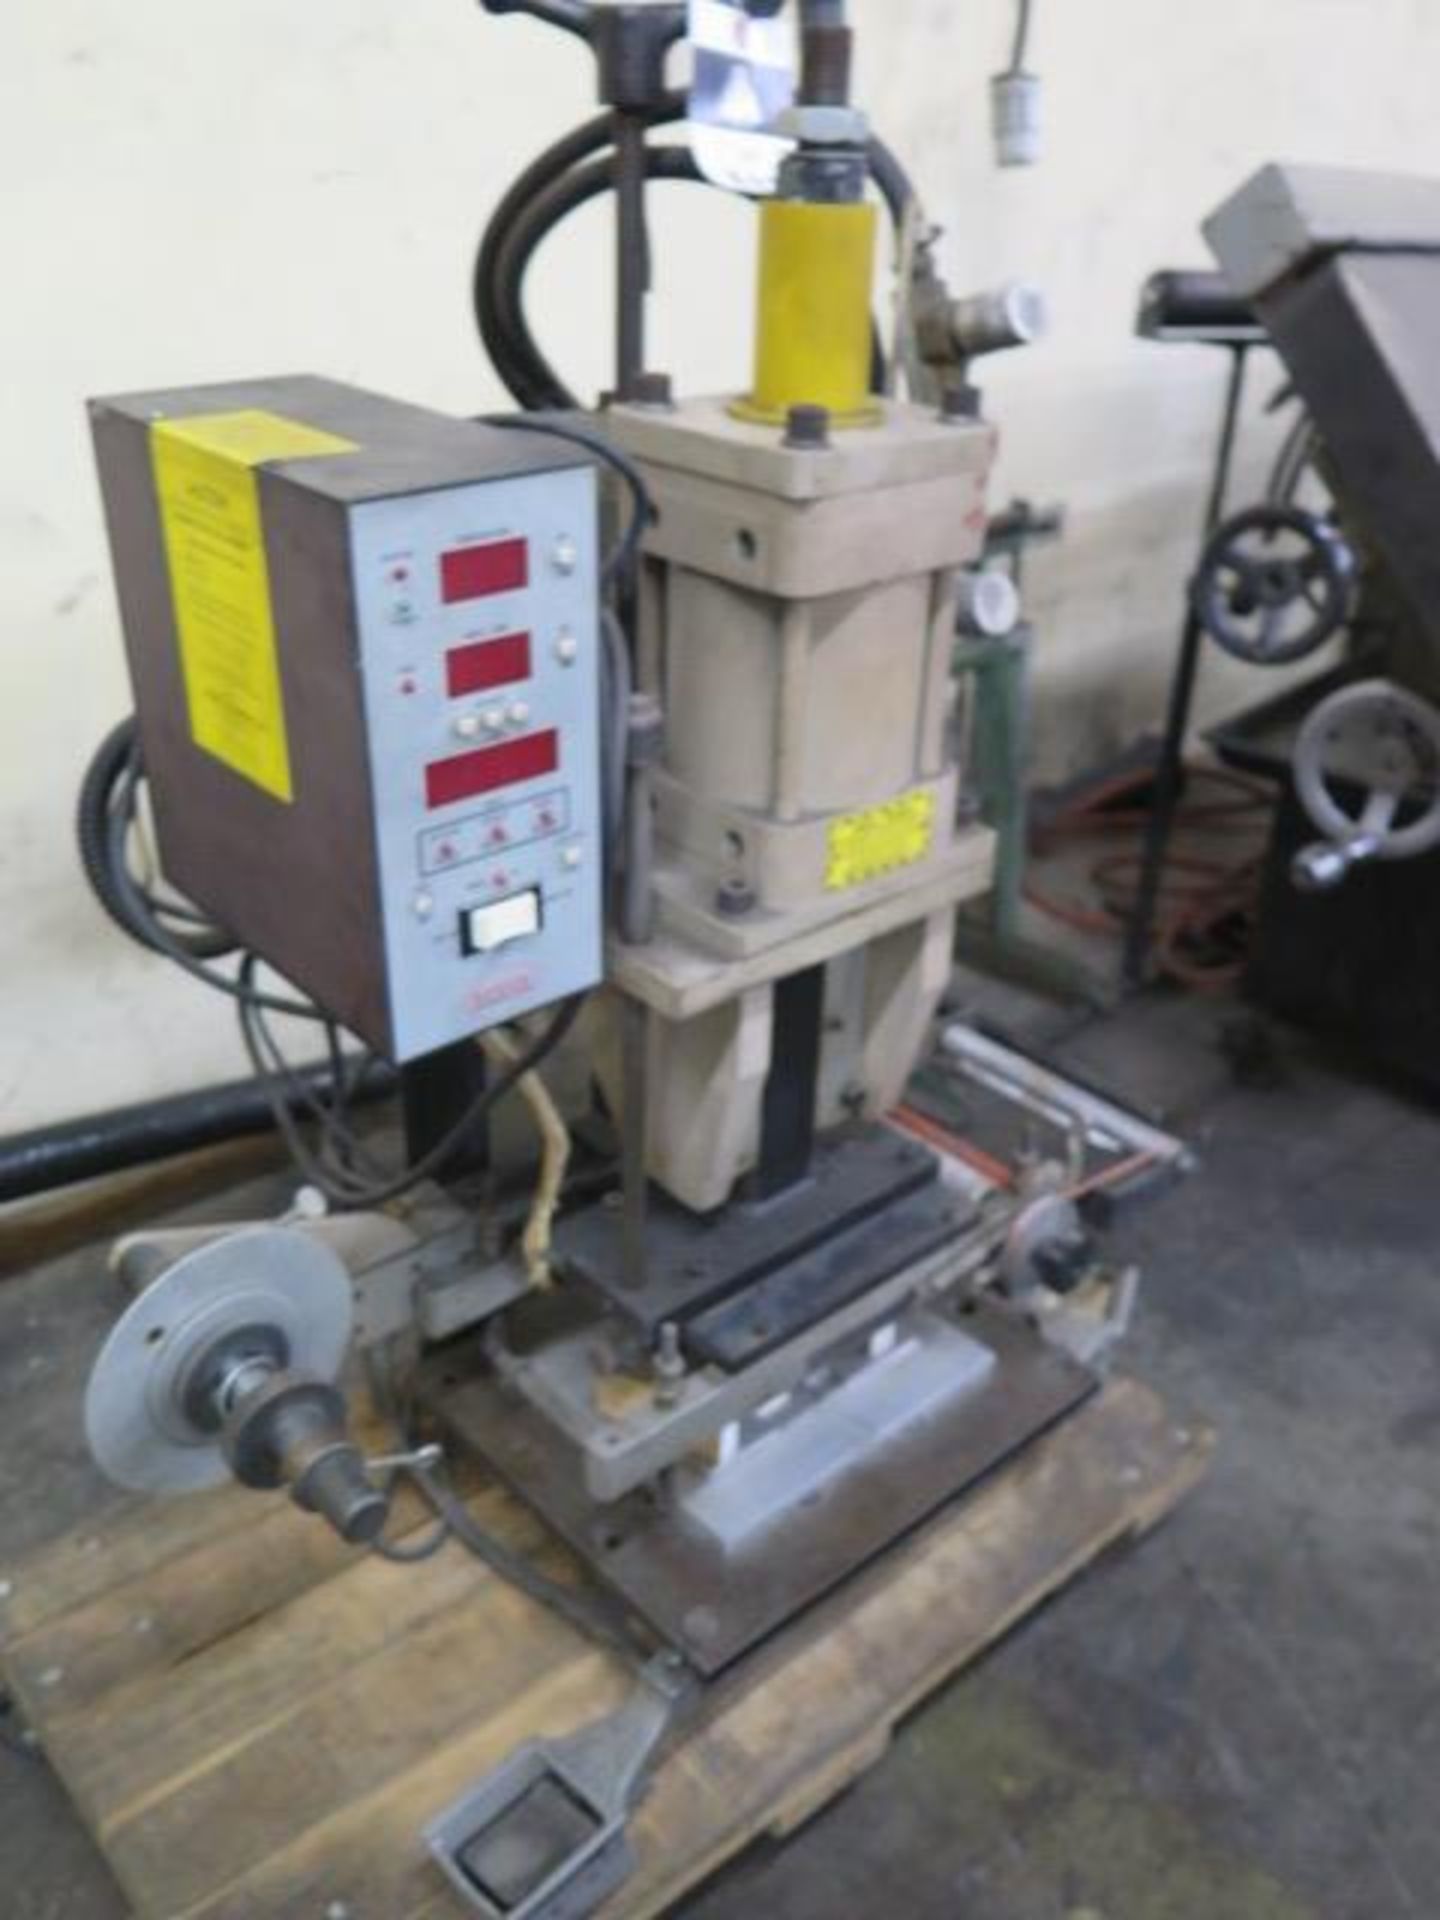 Kensol mdl. K16D 5 ½” Hot Stamping Machine s/n IED3381JA (SOLD AS-IS - NO WARRANTY) - Image 3 of 6